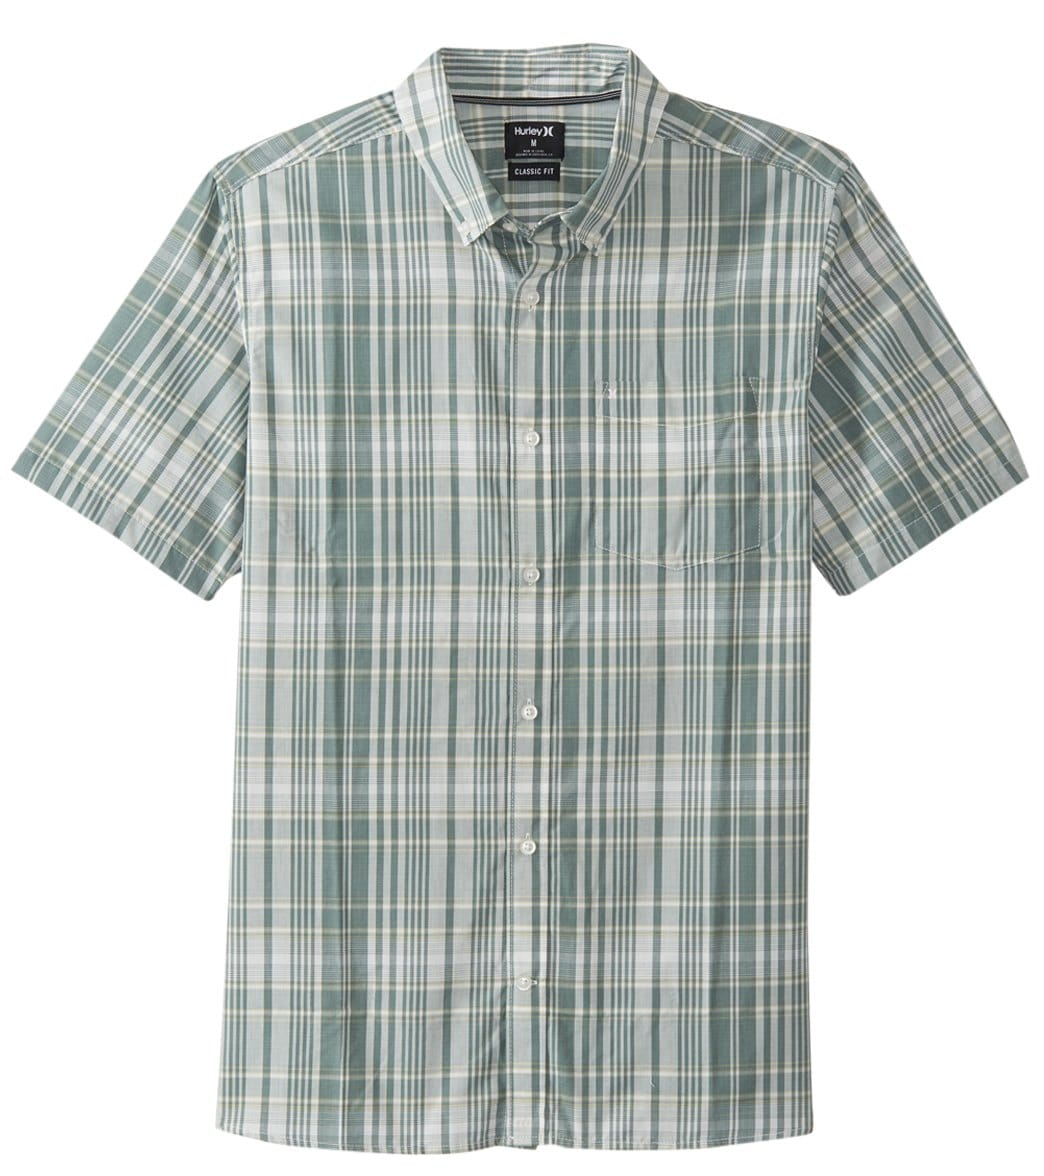 Hurley Men's Dri-Fit Johnny Short Sleeve Woven Shirt - Clay Green Small Cotton/Cotton/Polyester - Swimoutlet.com